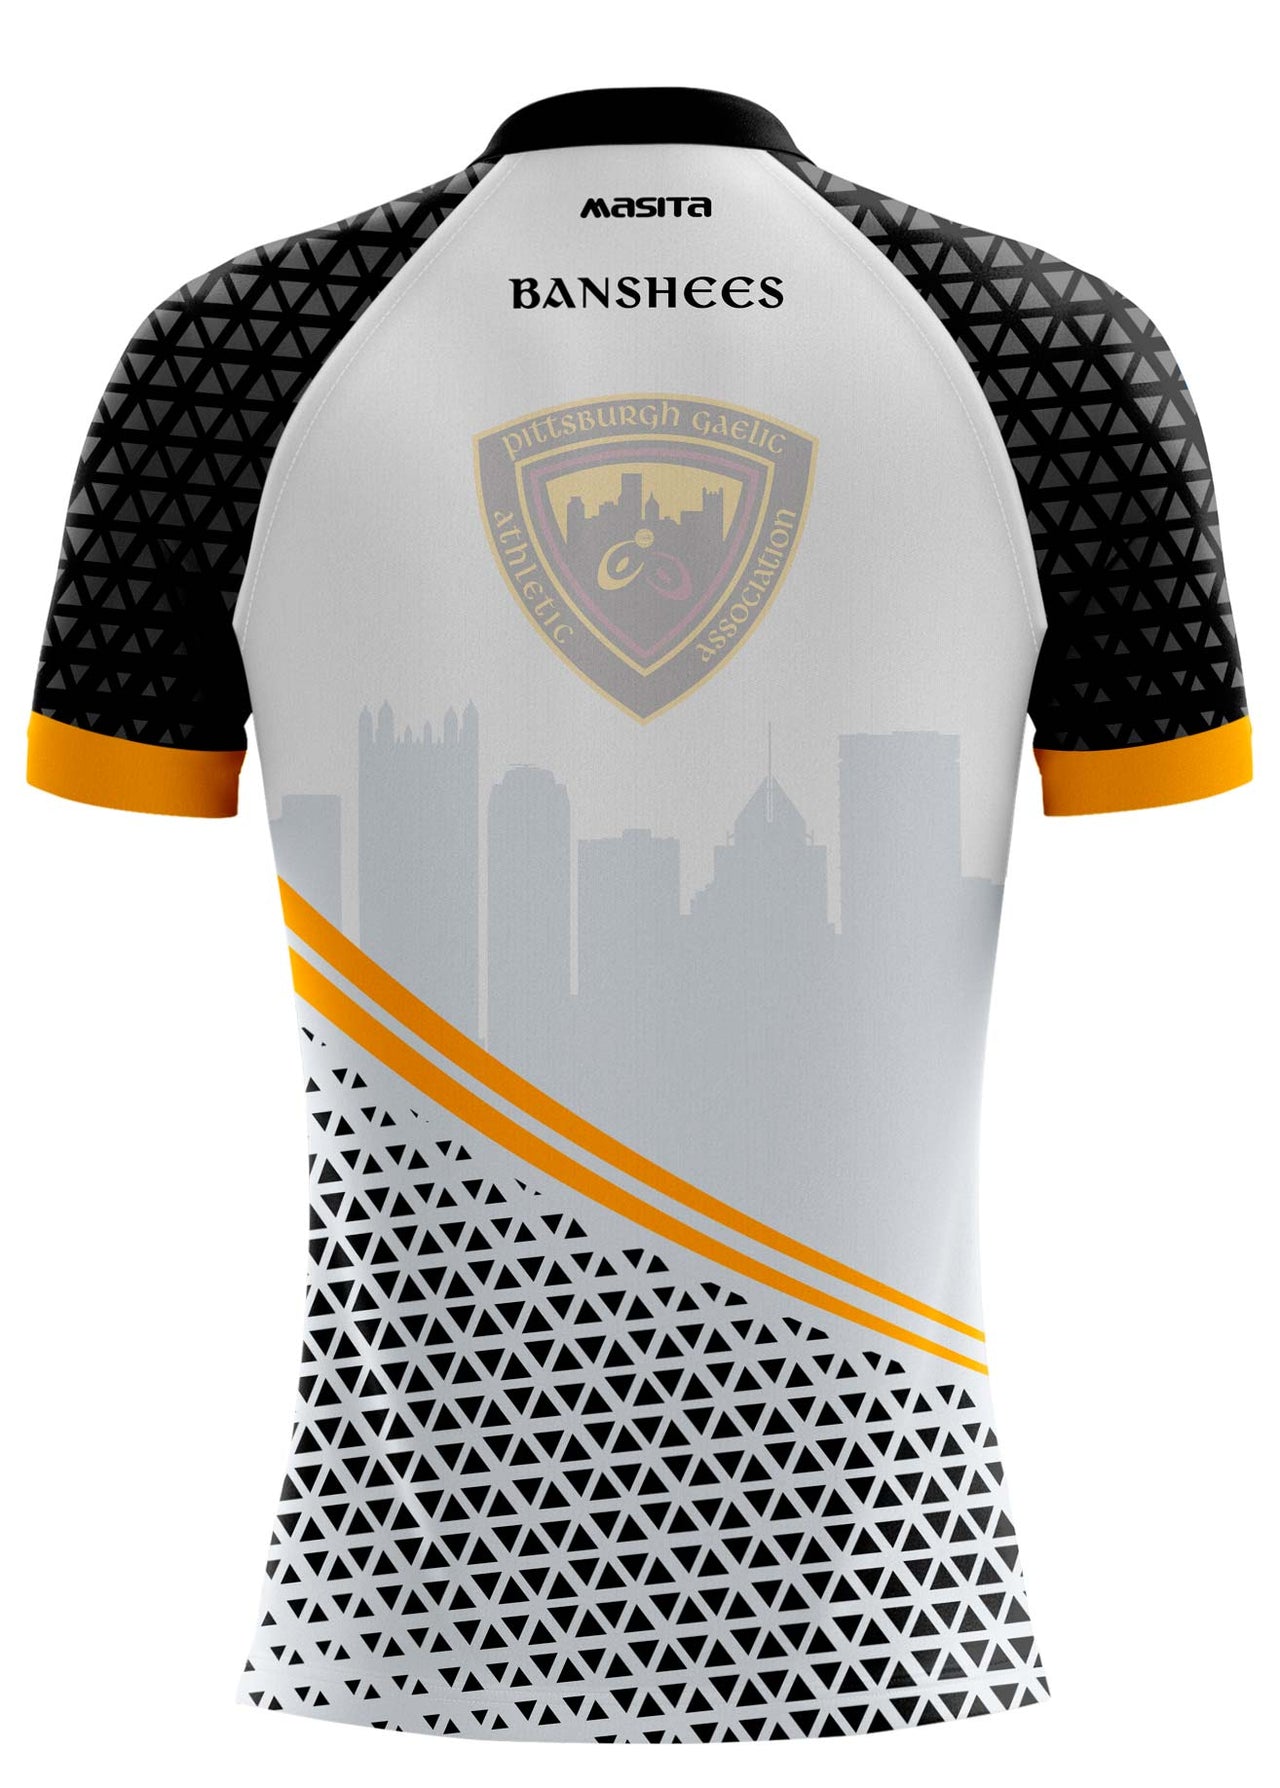 Pittsburgh Banshees Training Jersey Player Fit Adult